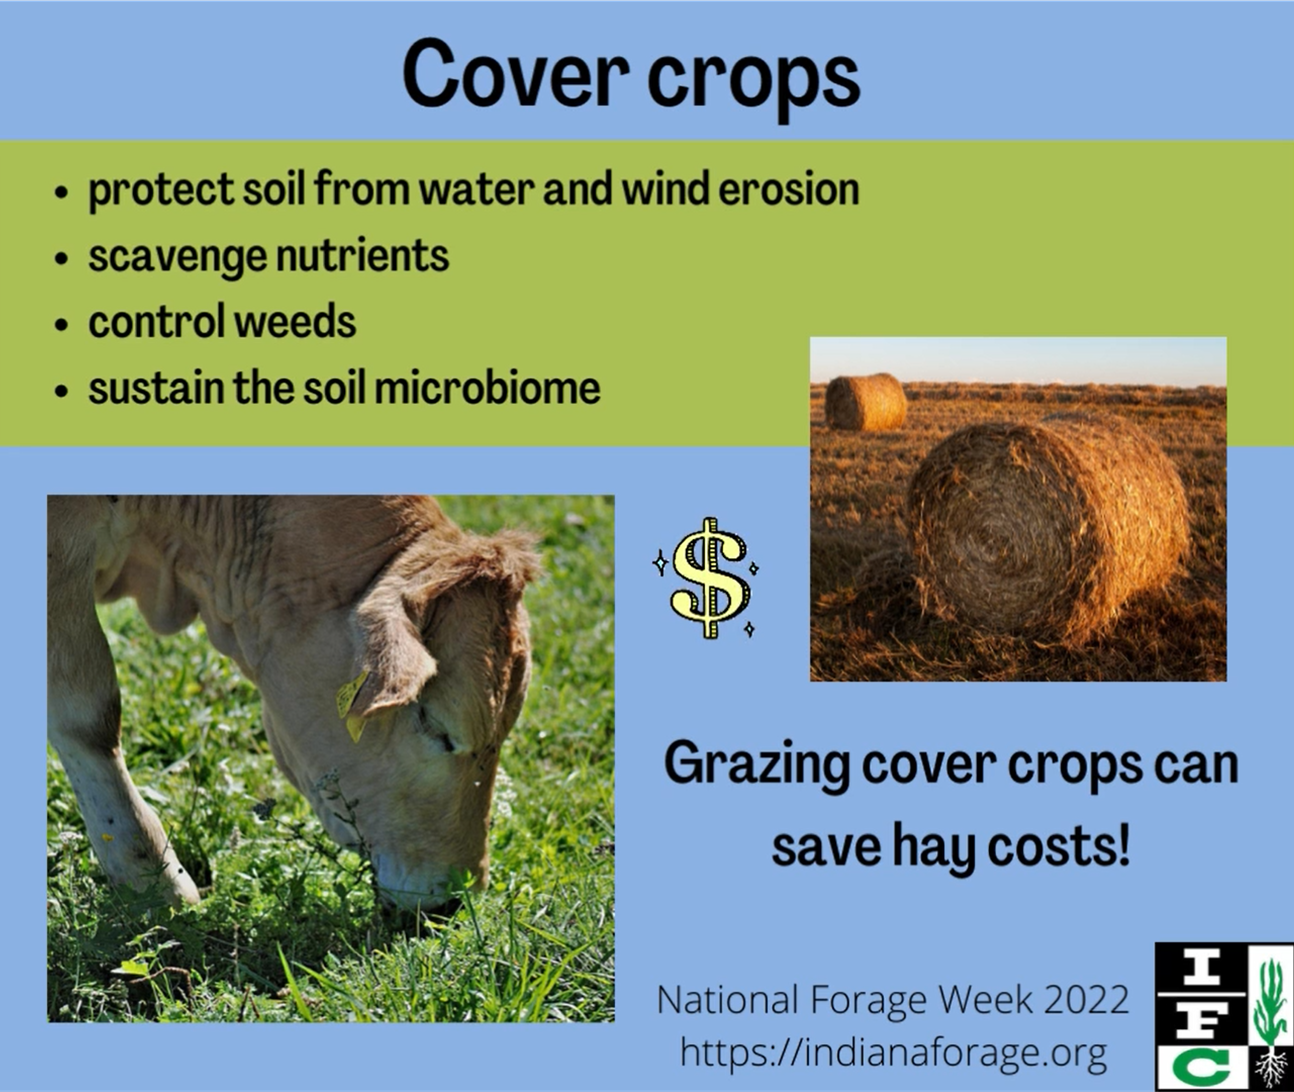 grazing cover crops